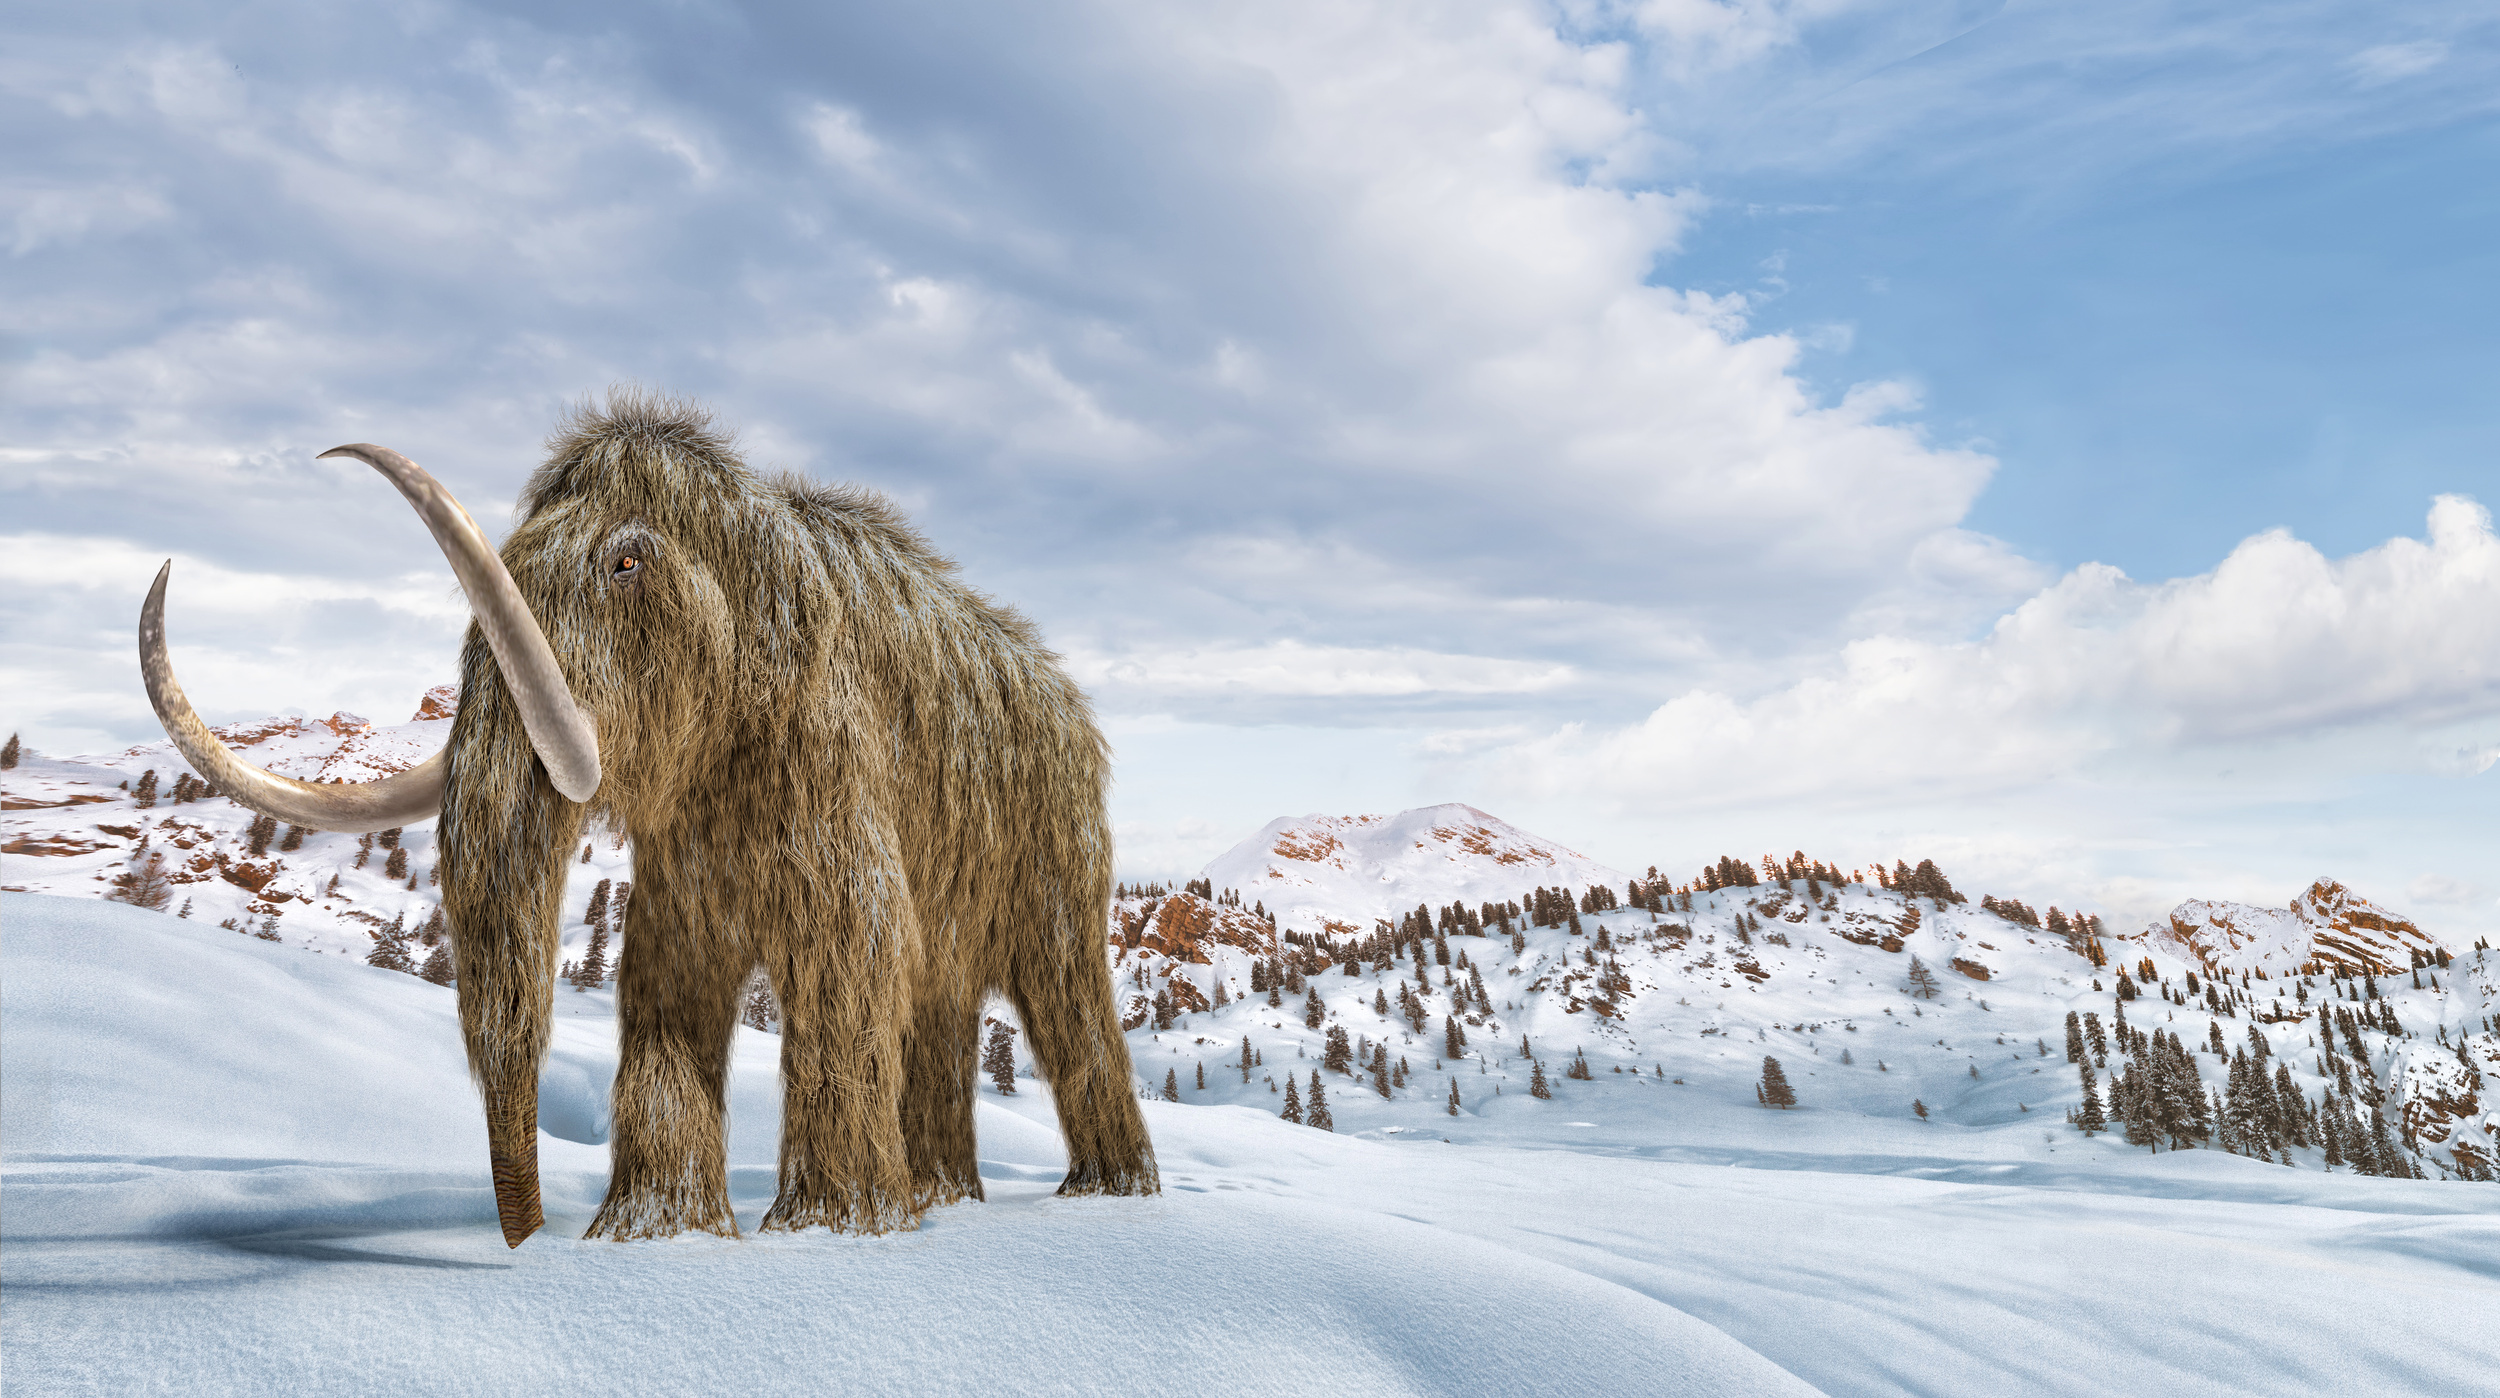 <p>A little-known fact is that Mammoths burrowed into the ground, especially in Siberia, where remains have been found. And in this eastern part of Russia, “mama” means “earth.” Thus it’s assumed the name came from describing the animal's most common action.</p><p>You may also like: <a href='https://www.yardbarker.com/lifestyle/articles/25_cooking_hacks_you_wont_believe_you_didnt_already_know_031424/s1__34563020'>25 cooking hacks you won’t believe you didn’t already know</a></p>